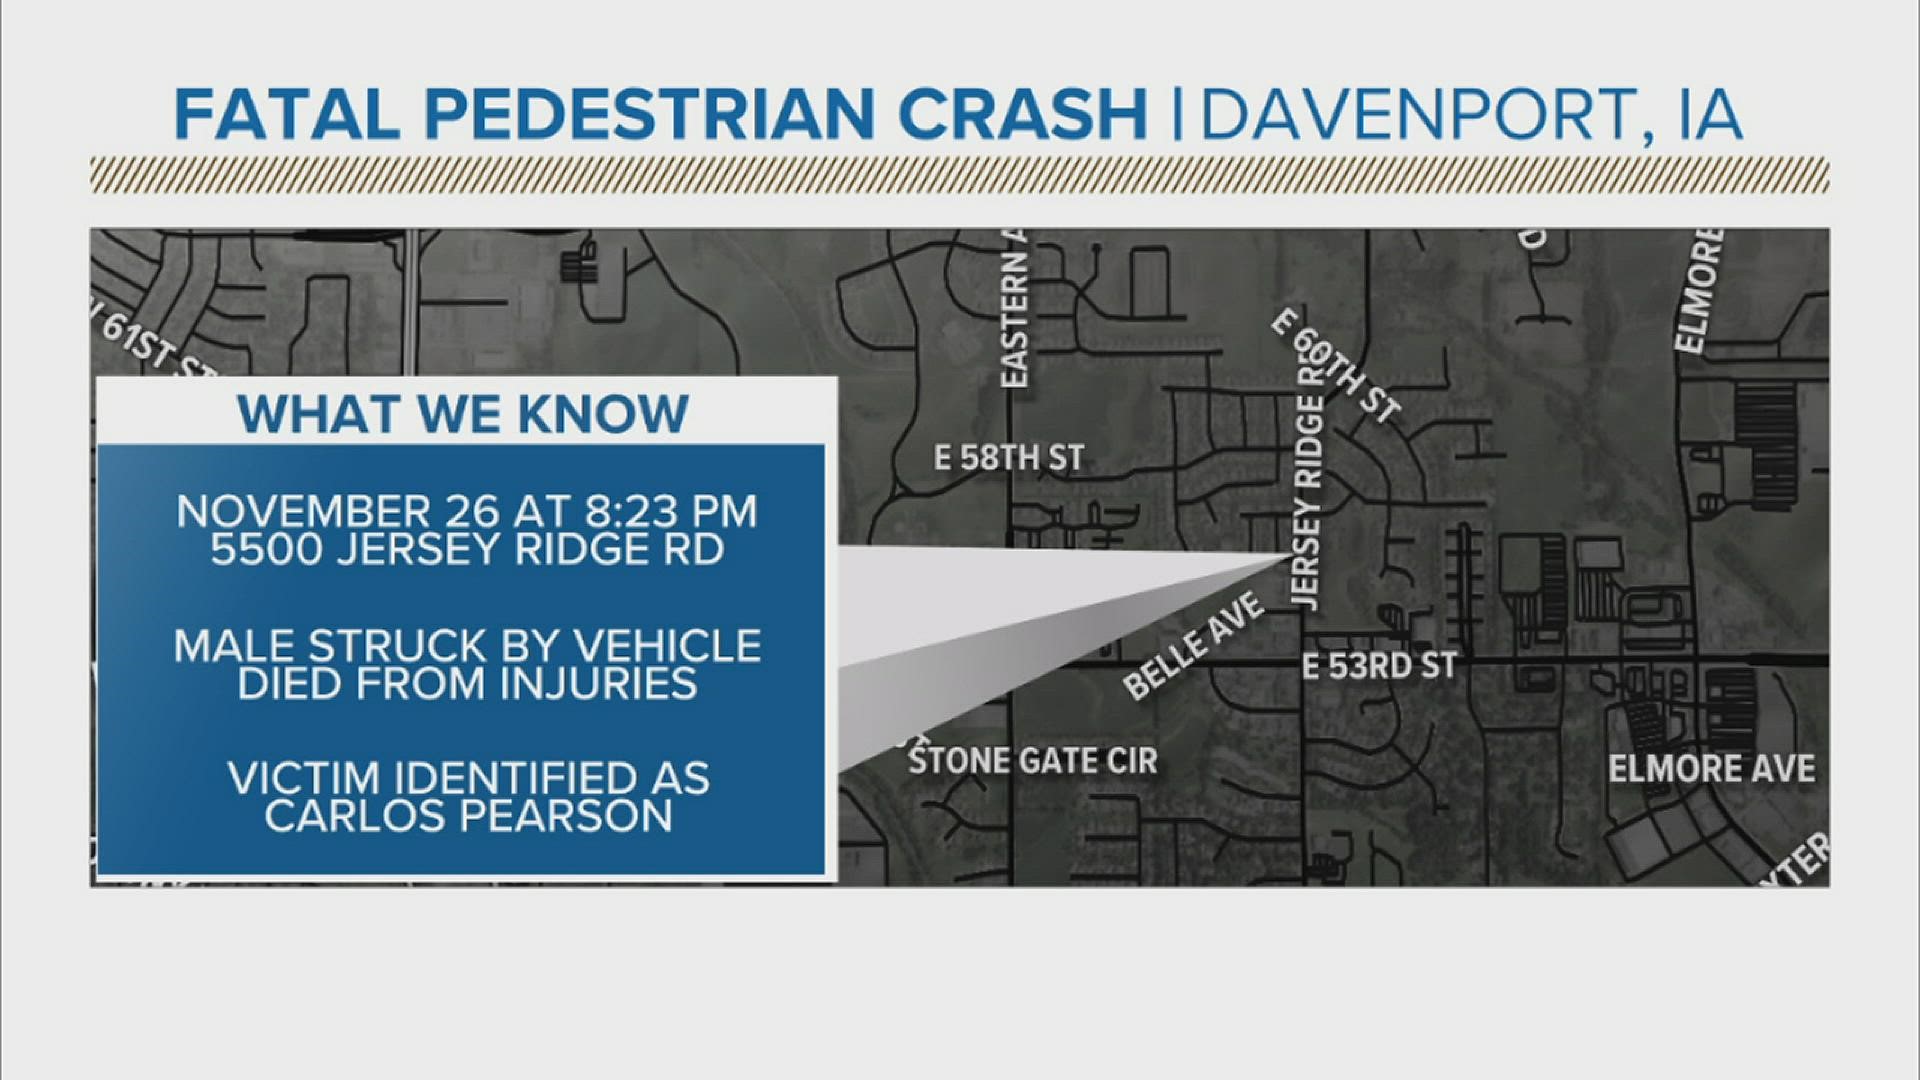 Carlos Pearson, 46, of Davenport was the pedestrian victim in Friday night's fatal collision on Jersey Ridge Road.